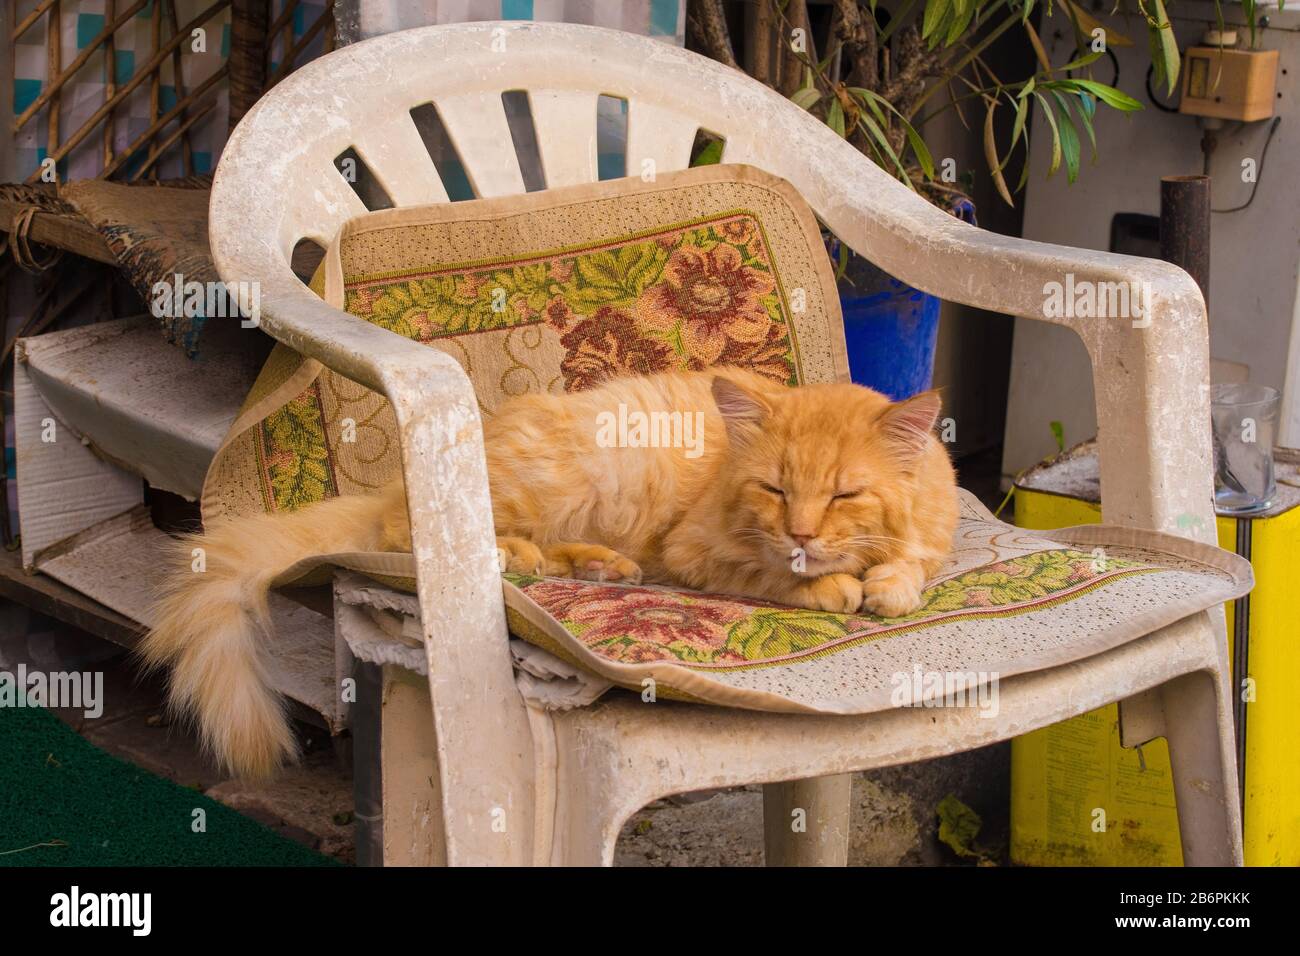 A street cat sleeps on a chair outside a shop on the island of Buyukada, one of the Prices' Islands, also known as Adalar, in the Sea of Marmara off t Stock Photo